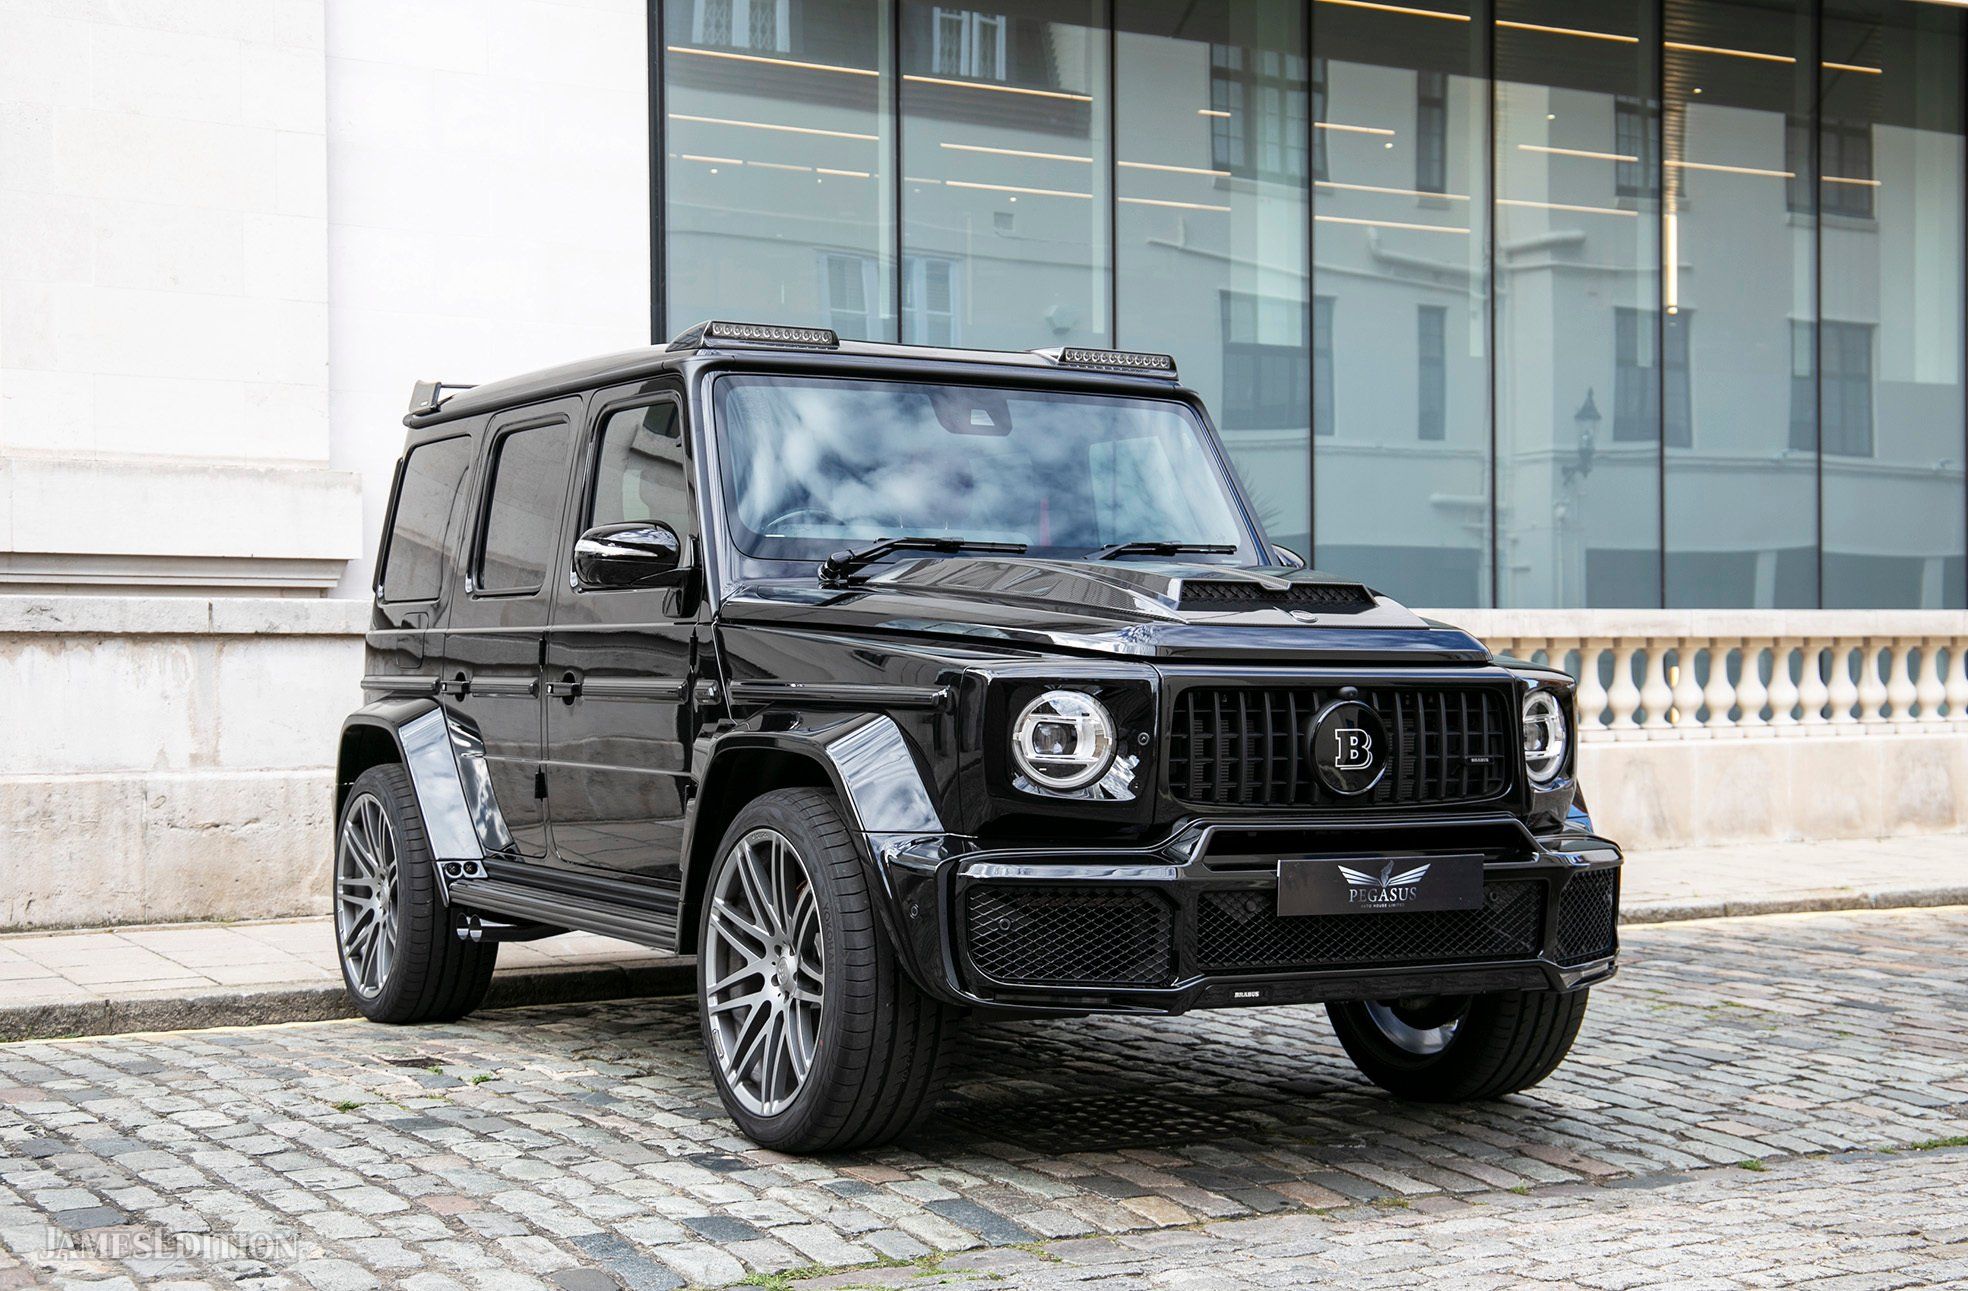 19 Mercedes Benz G700 Brabus In City Of London United Kingdom For Sale